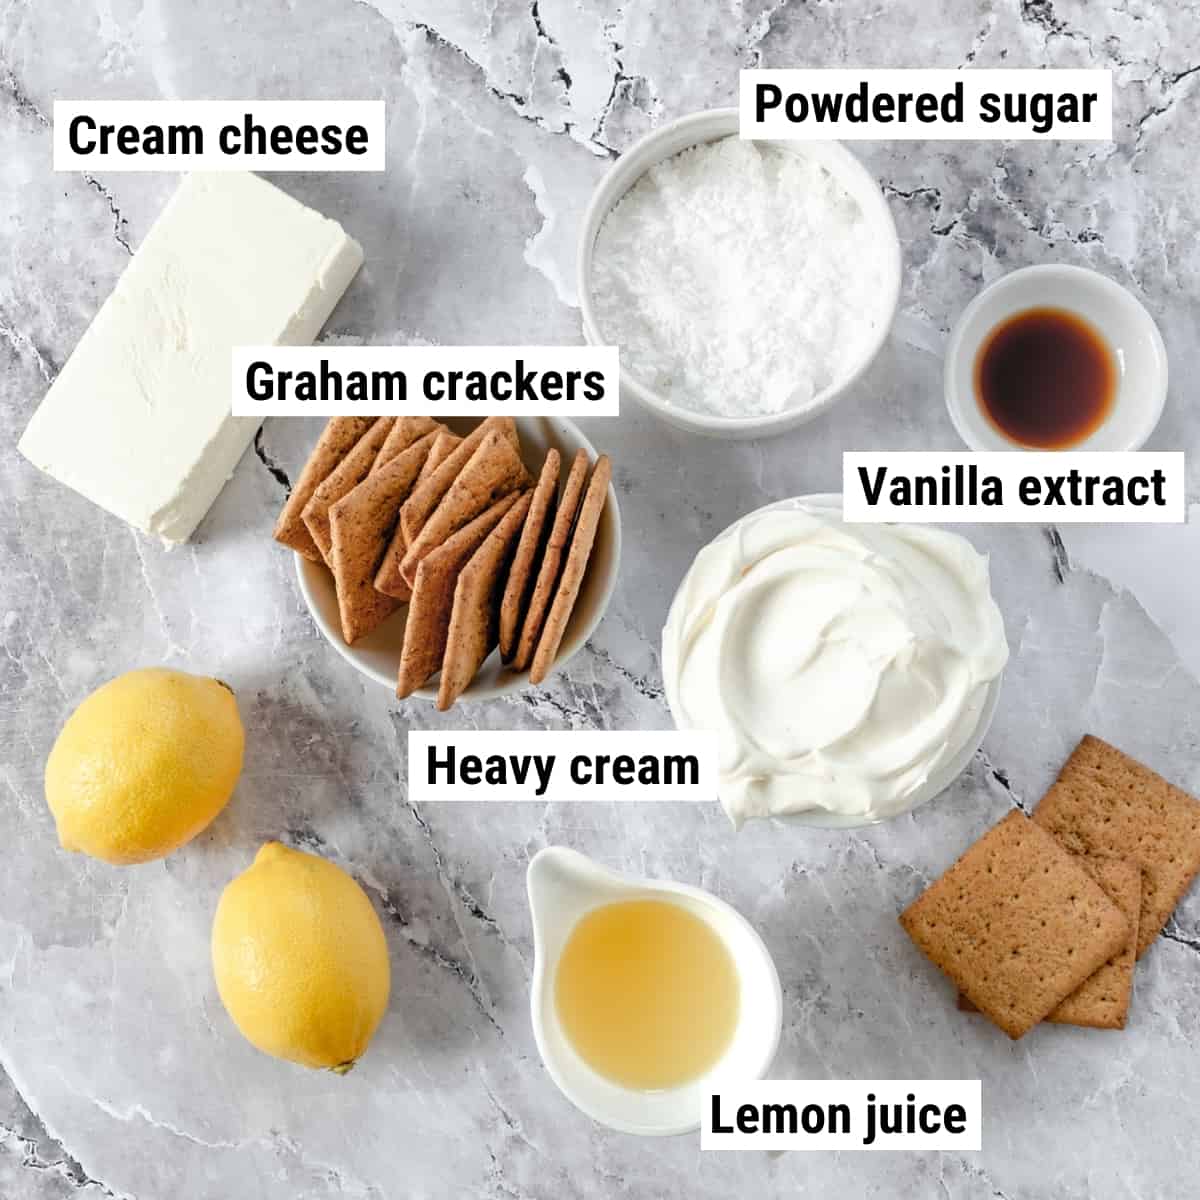 The ingredients to make a lemon icebox cake laid out on a table.